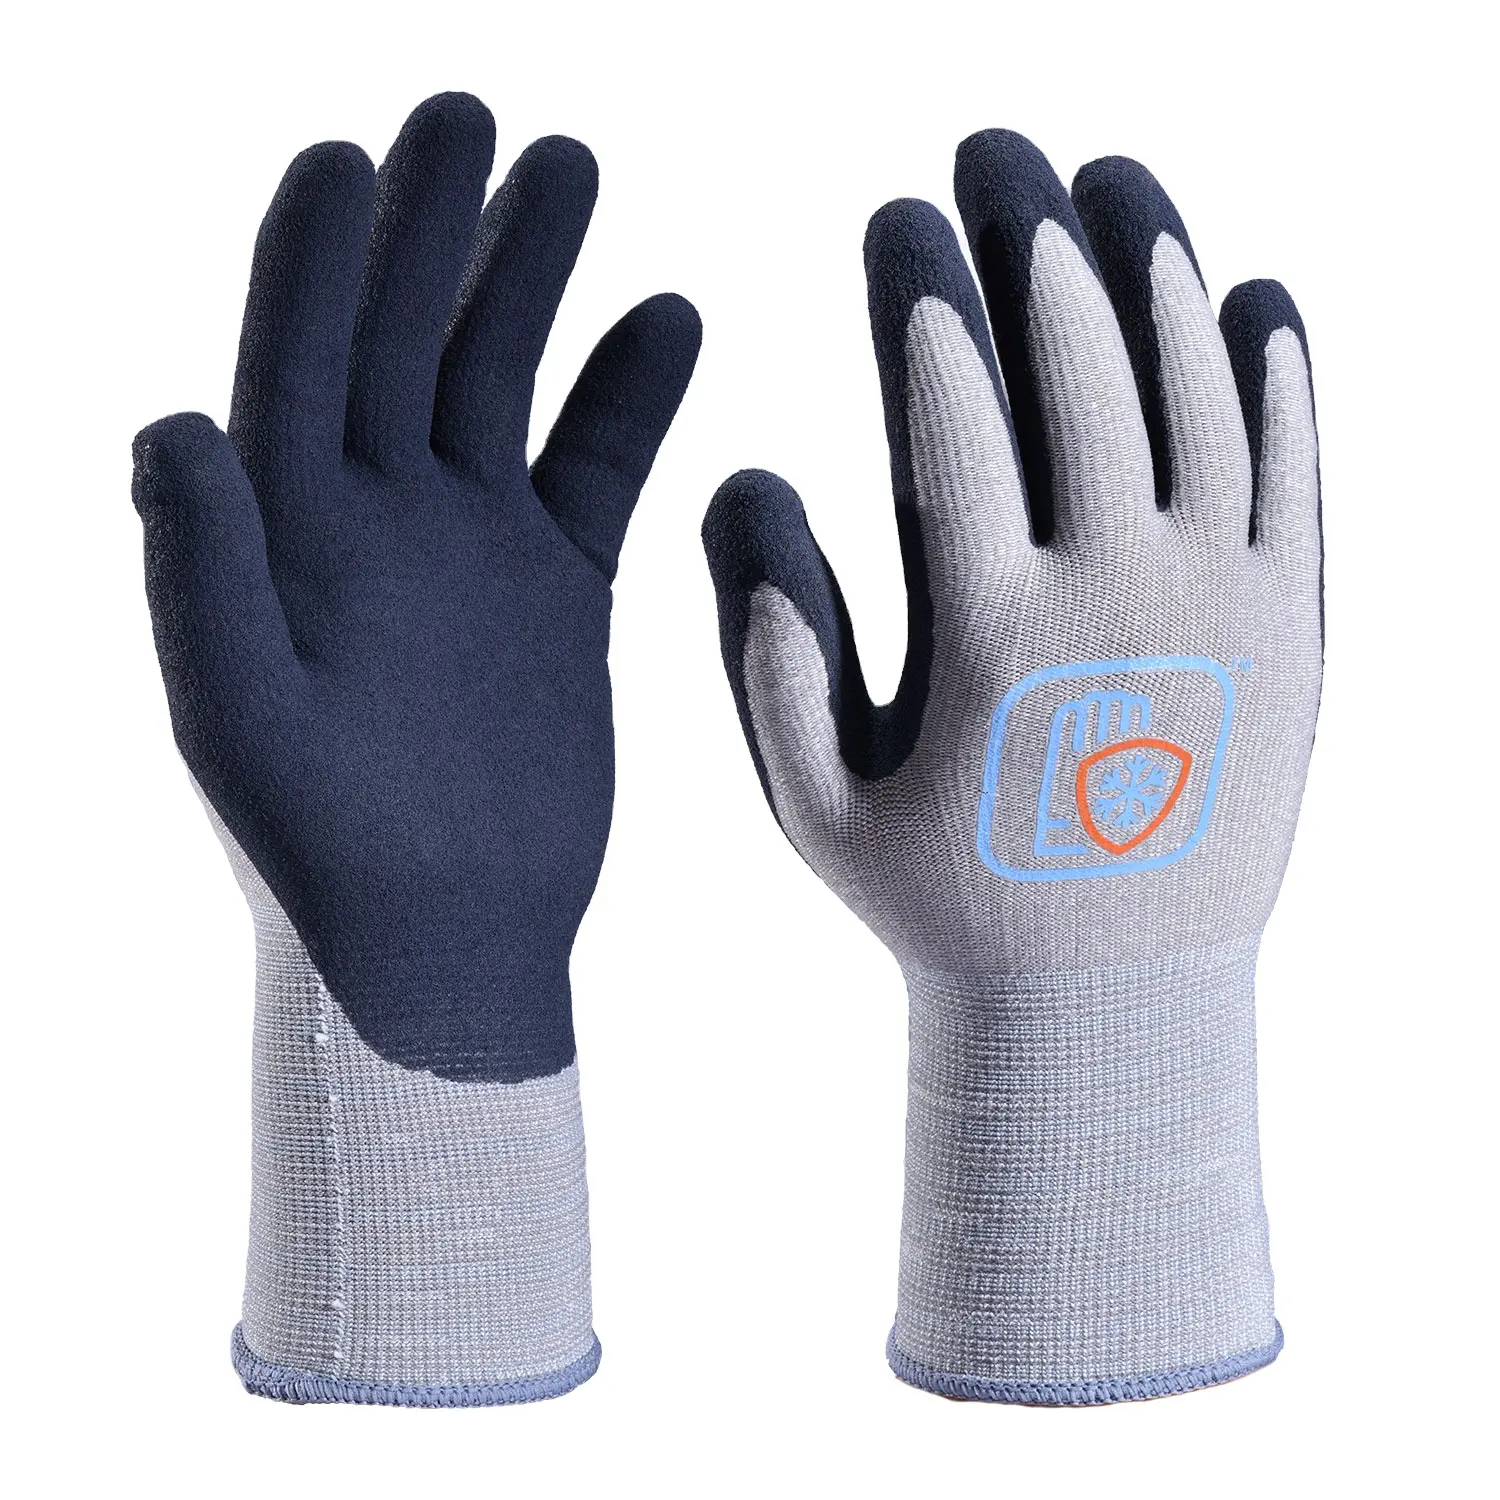 CE Approved Nitrile Coated Safety Work Gloves for Industrial, Construction, Cleaning Work, Electric, Garden, Mechanics, Driving